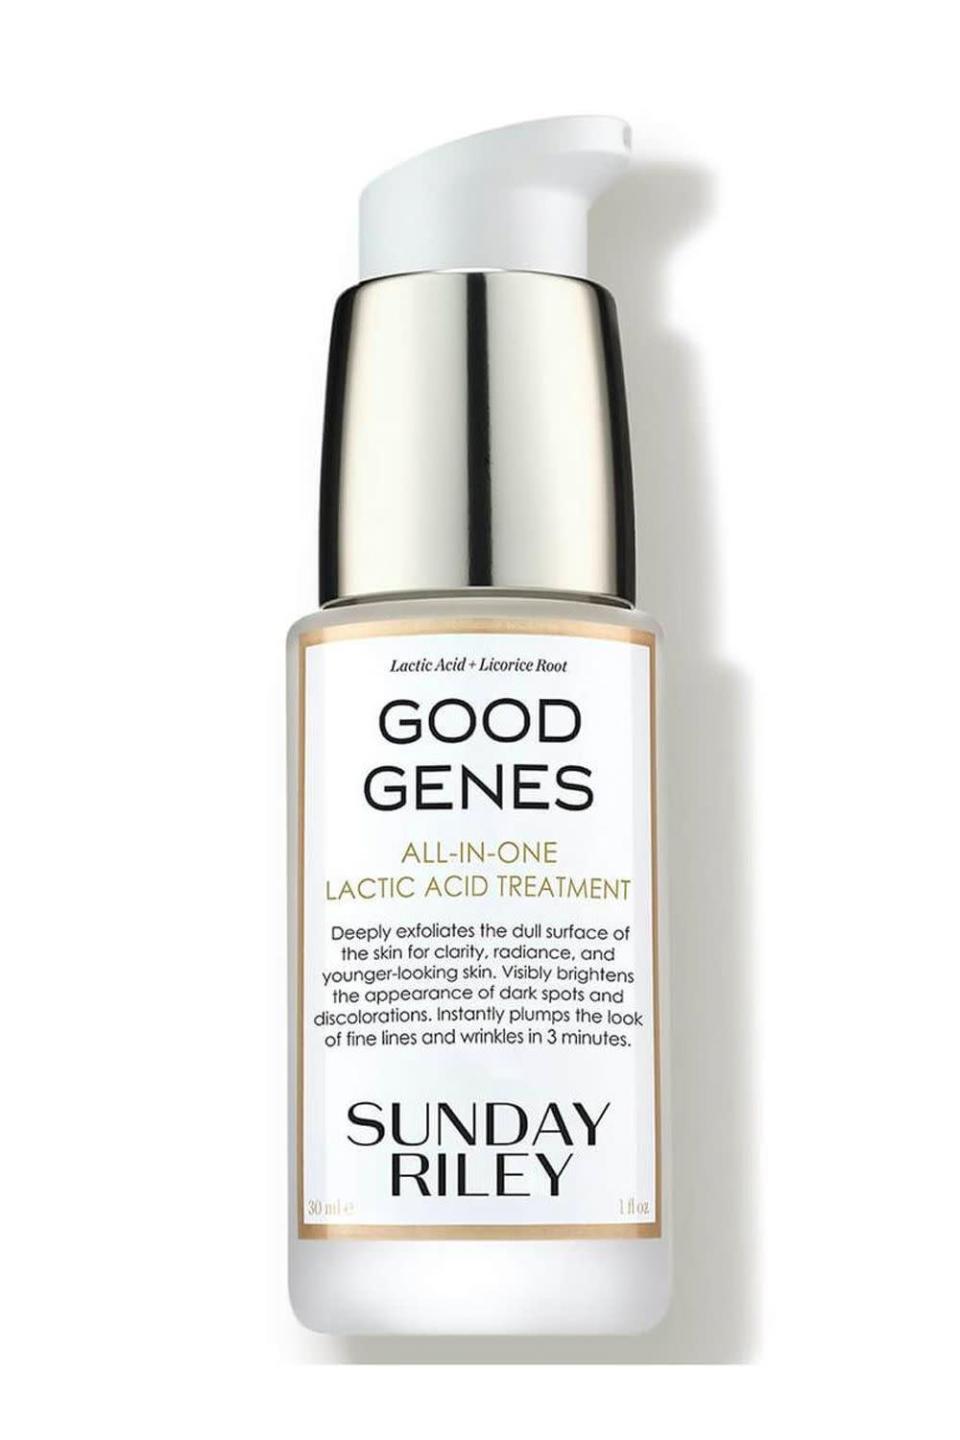 <p><strong>SUNDAY RILEY</strong></p><p>sephora.com</p><p><strong>$85.00</strong></p><p><a href="https://go.redirectingat.com?id=74968X1596630&url=https%3A%2F%2Fwww.sephora.com%2Fproduct%2Fgood-genes-all-in-one-lactic-acid-treatment-P309308&sref=https%3A%2F%2Fwww.cosmopolitan.com%2Fstyle-beauty%2Fbeauty%2Fg40604552%2Fbest-anti-aging-serums%2F" rel="nofollow noopener" target="_blank" data-ylk="slk:Shop Now" class="link ">Shop Now</a></p><p>There's a reason why this cult-favorite serum has like a gajillion five-star ratings: It really, truly works. It <strong>uses a multitasking AHA called lactic acid</strong> (think of it as glycolic acid's chiller sister) to <a href="https://www.cosmopolitan.com/style-beauty/beauty/a53481/how-to-exfoliate-your-face/" rel="nofollow noopener" target="_blank" data-ylk="slk:exfoliate skin" class="link ">exfoliate skin</a> and boost its hydration levels too. The result? An improvement in fine lines and uneven texture, a reduction in pore size, and fewer dark spots too.</p><p><em><strong>THE REVIEW: </strong>"This stuff deserves 10 stars at least—it has totally changed by skin! It has smoothed out my texture texture, gotten rid of black heads and clogged pores on my chin, and even helped fade my discoloration too. I use this everyday now under my moisturizer before bed."</em></p>